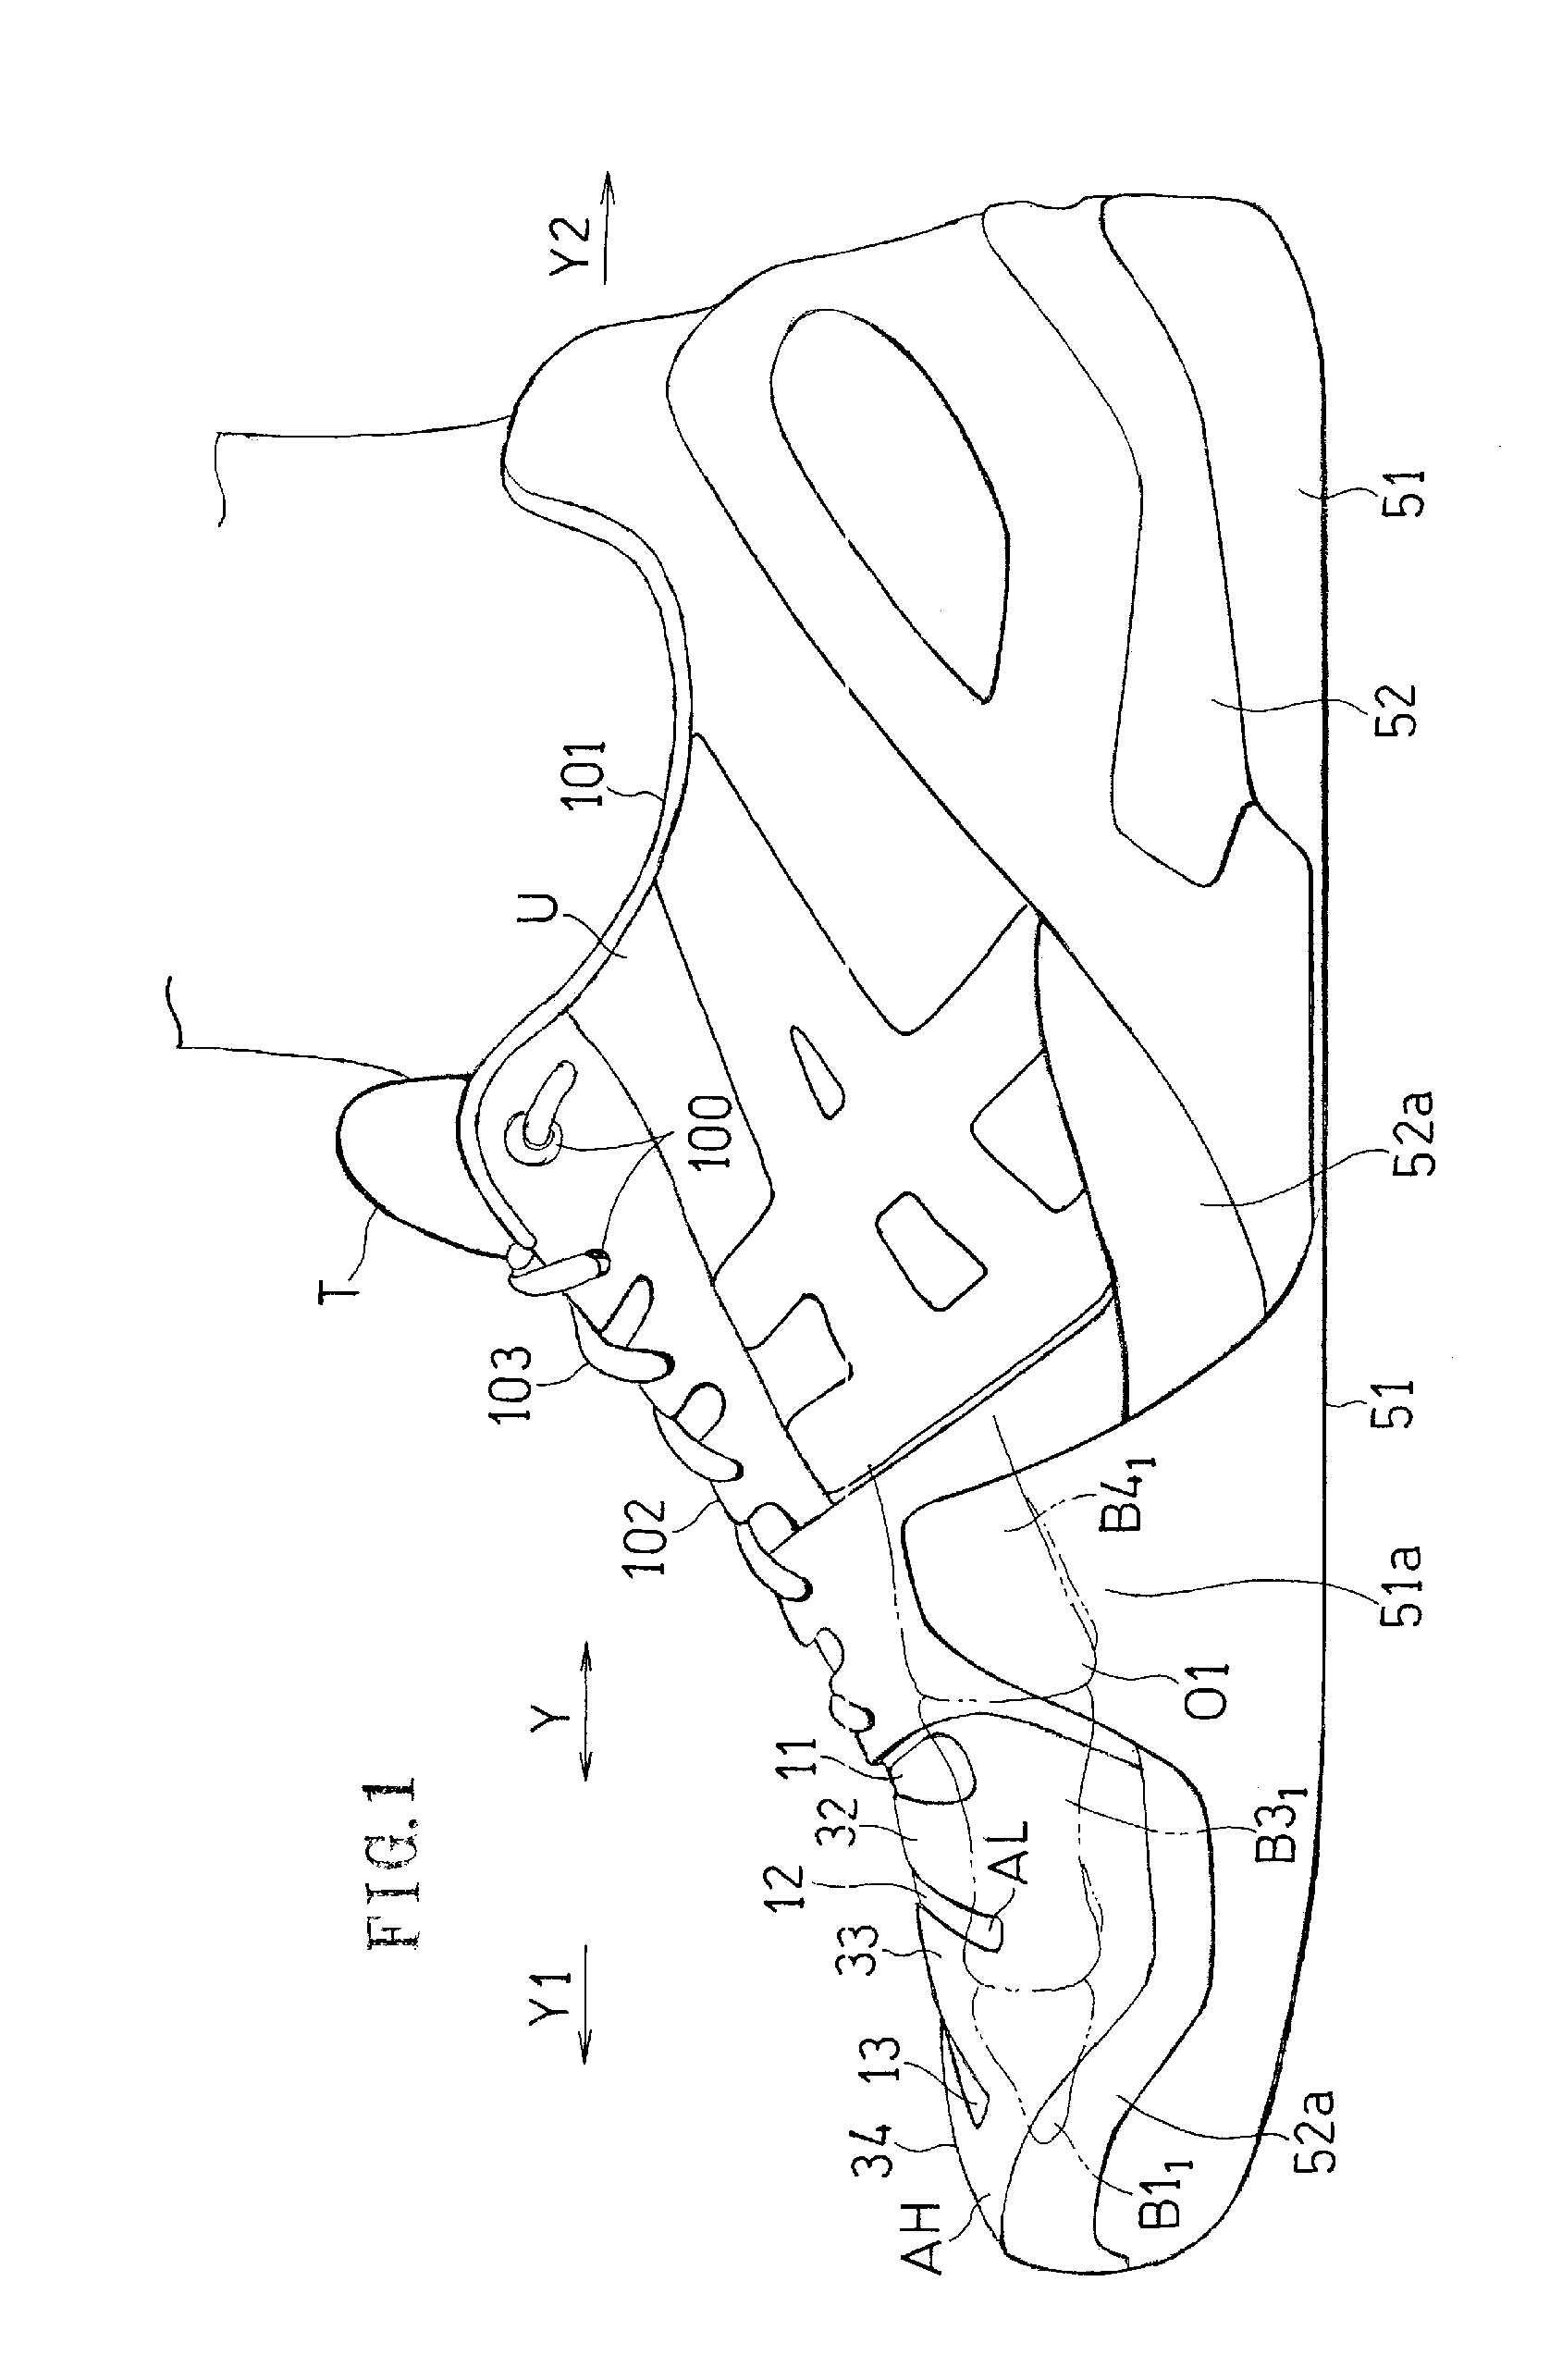 Structure for front foot portion of upper of shoe